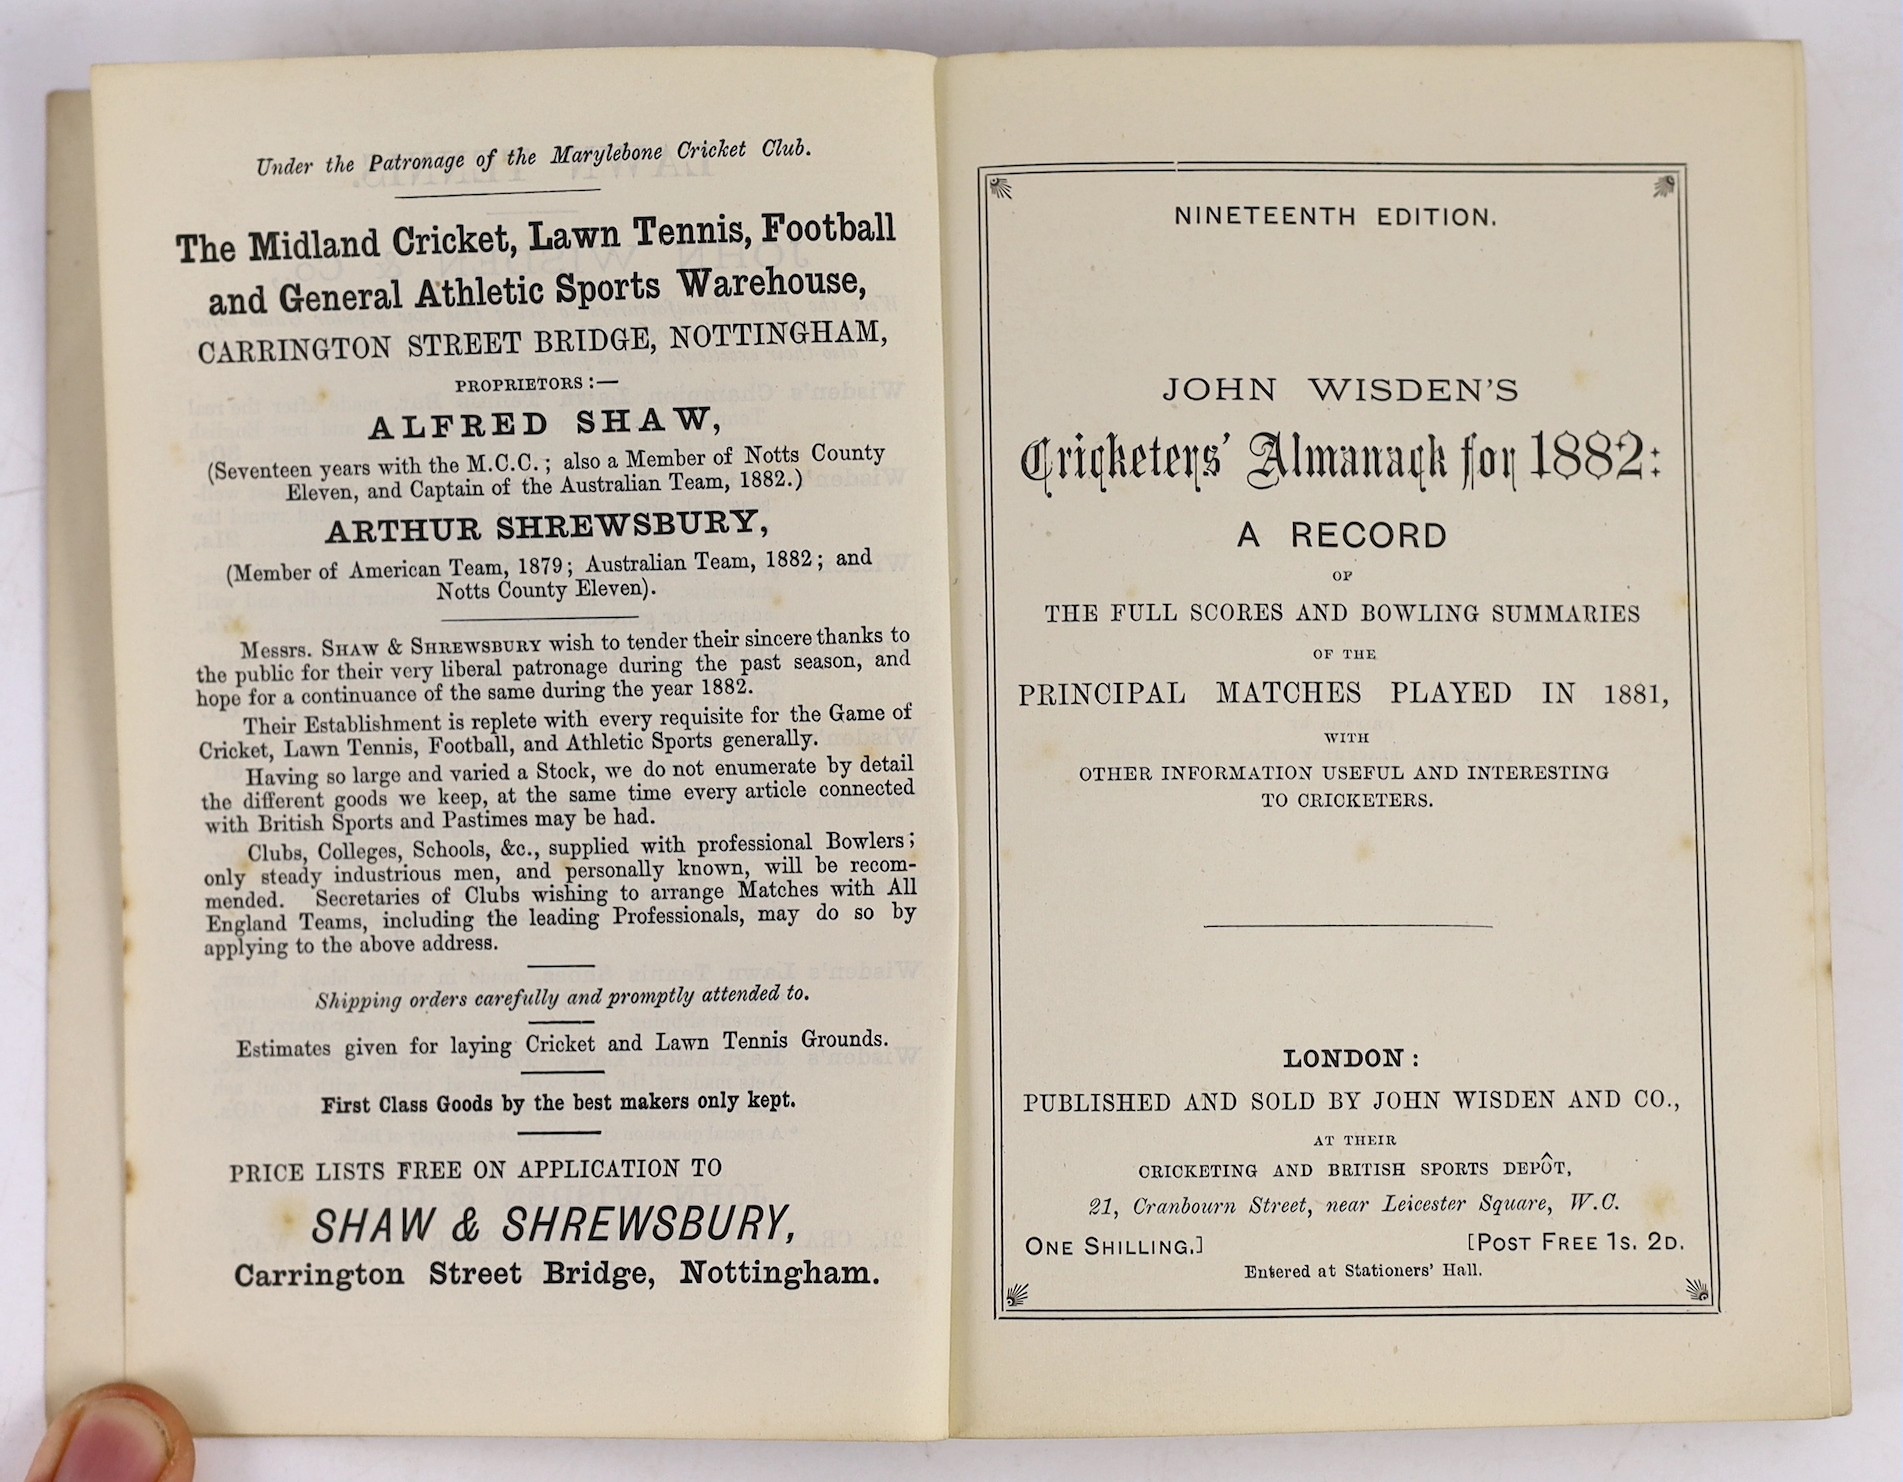 Wisden, John - Cricketers’ Almanack for 1882, 19th edition, original paper wrappers, minor loss to spine head and foot, slight spotting to endpapers.